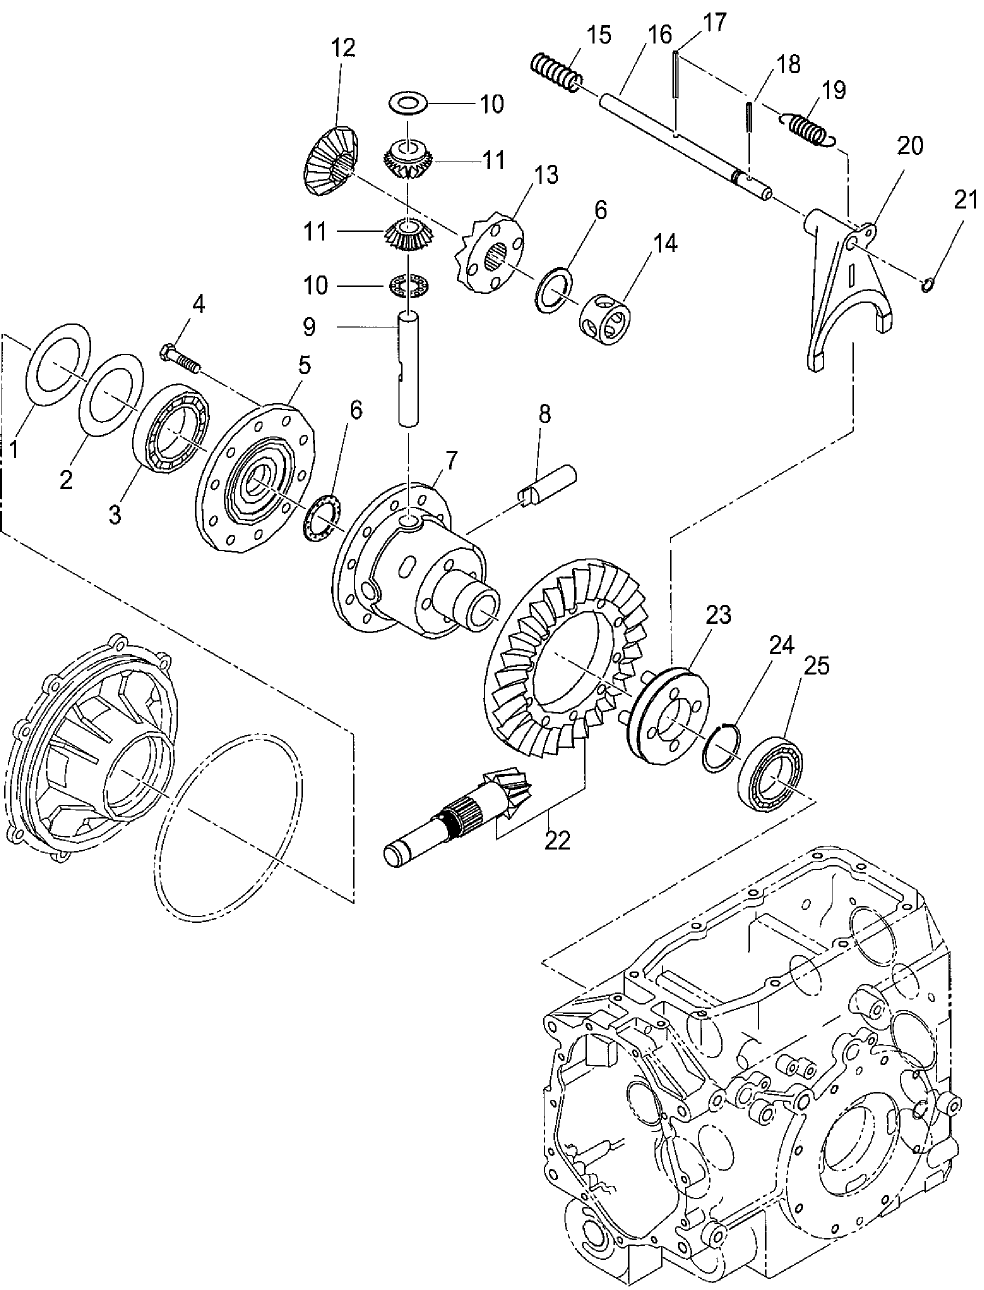 04.03 DIFFERENTIAL GEARS